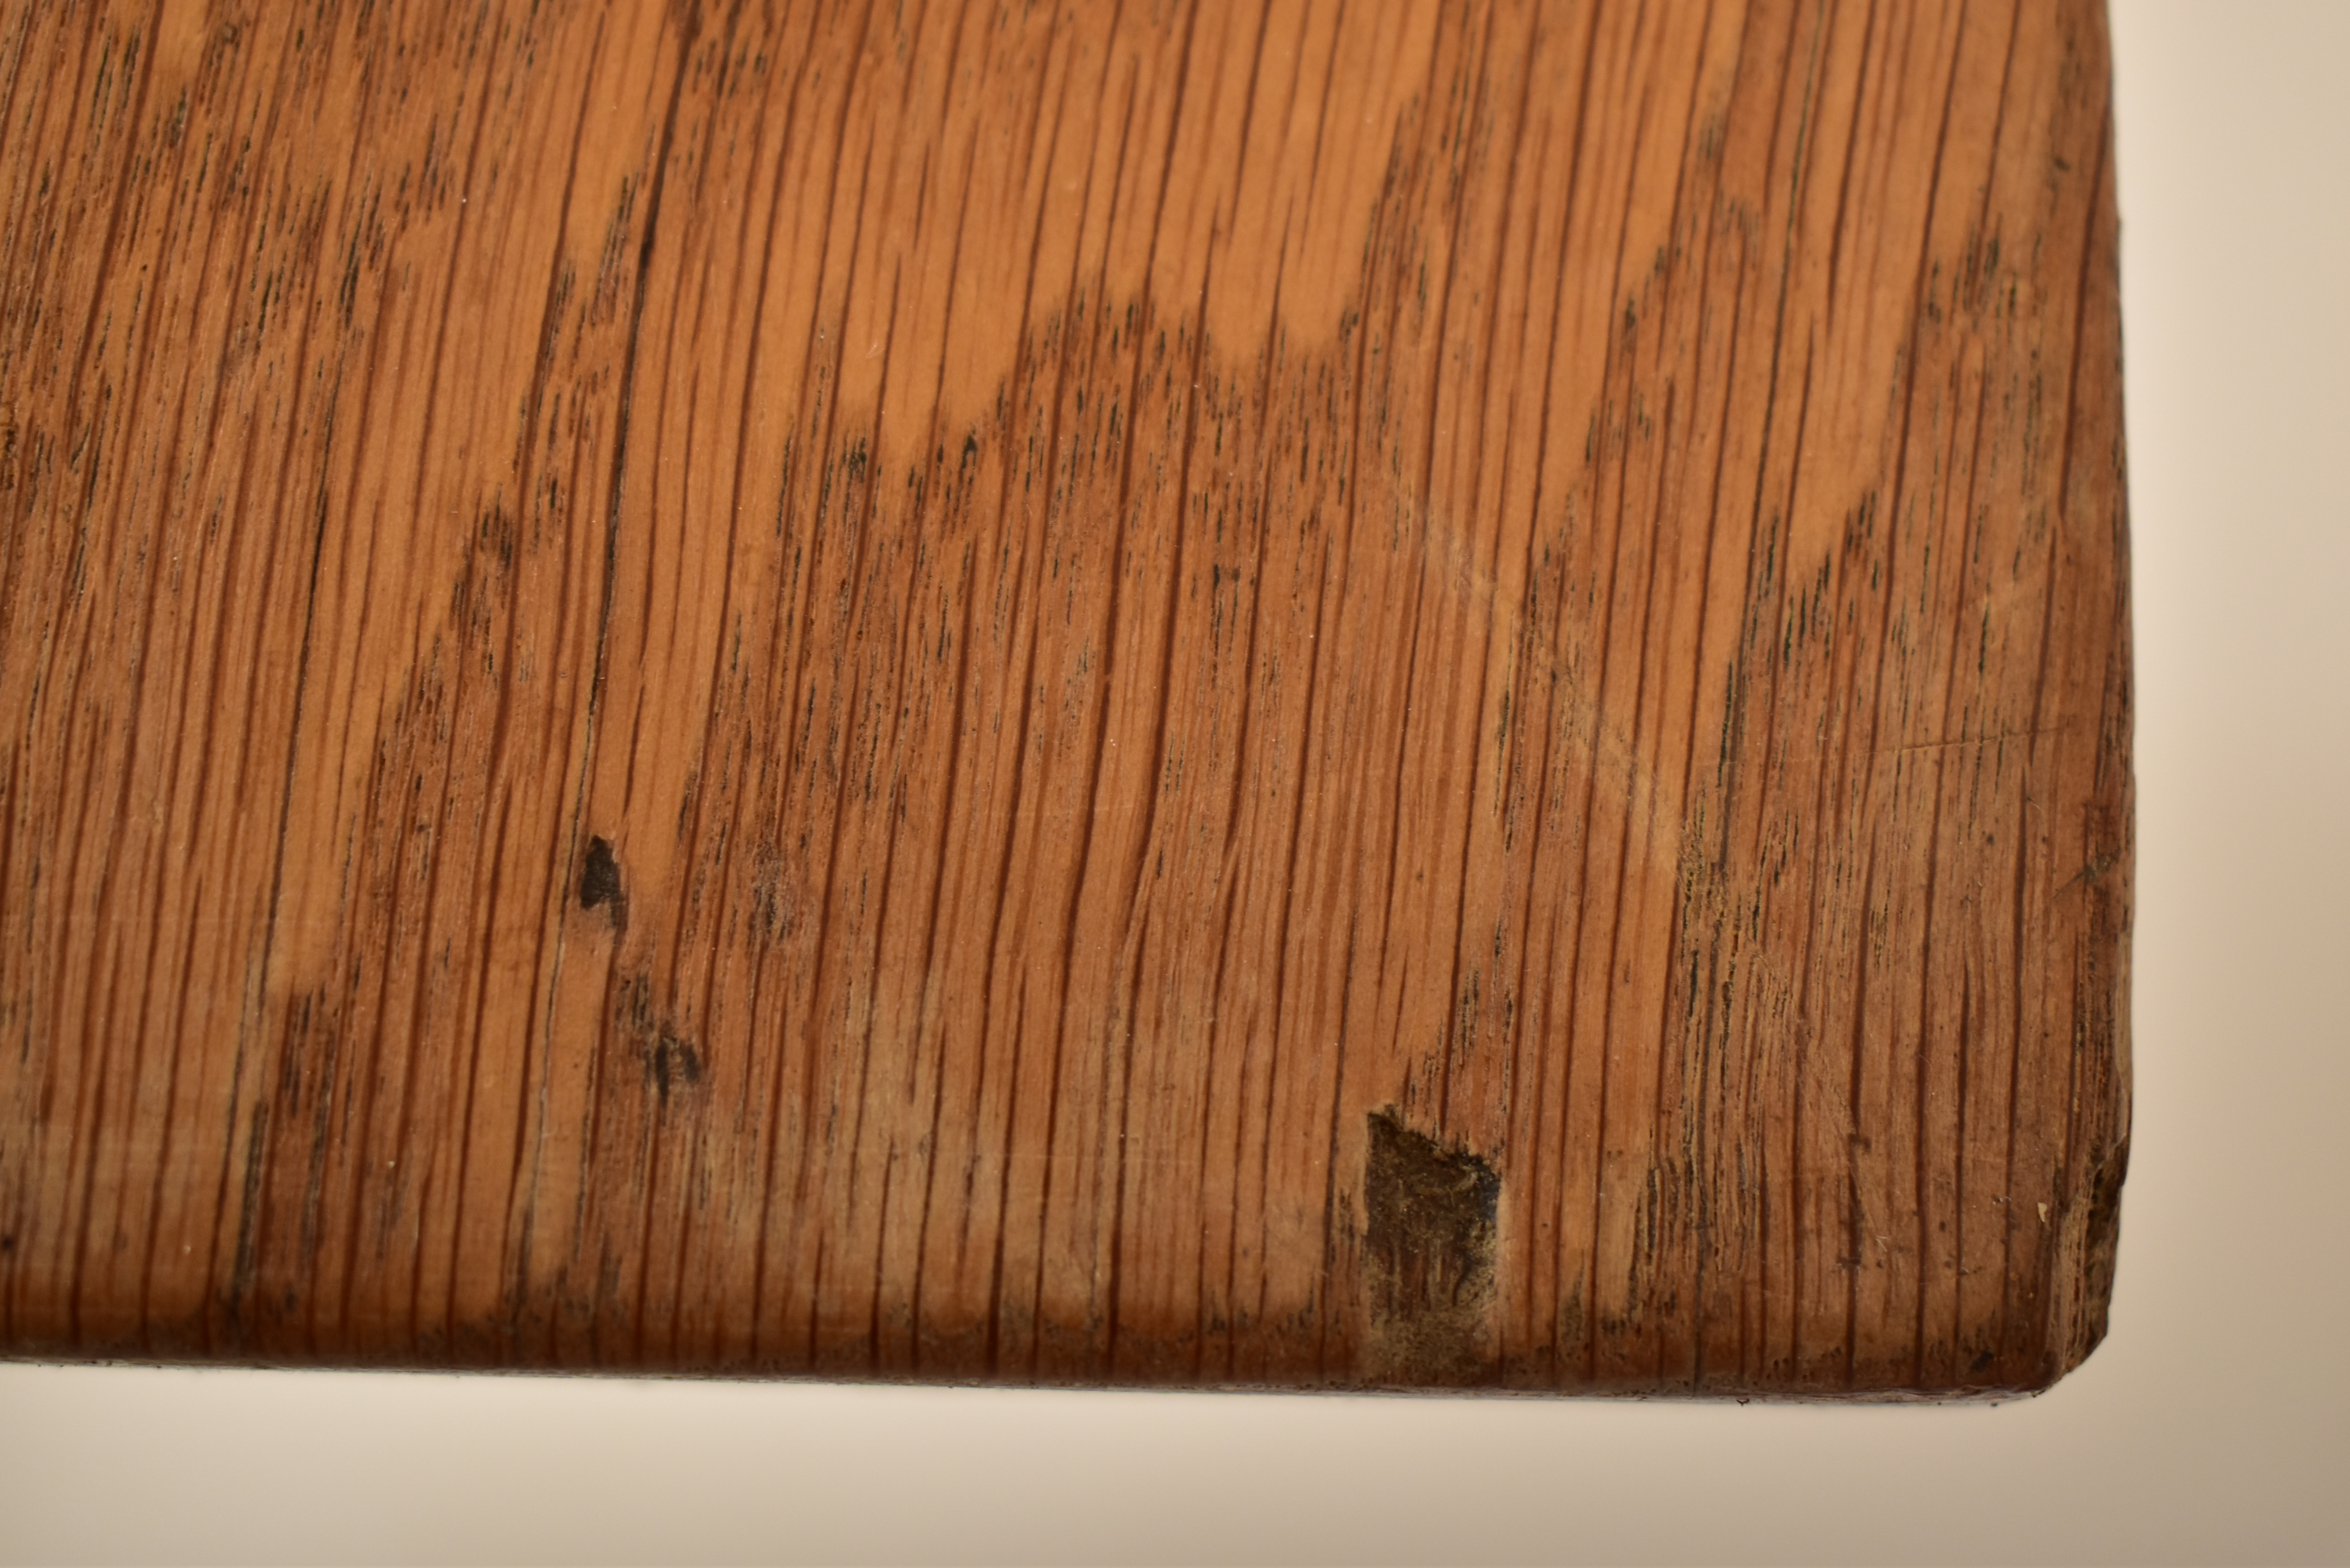 WITHDRAWN - LARGE 20TH CENTURY SOLID ELM REFECTORY DINING TABLE - Image 5 of 5